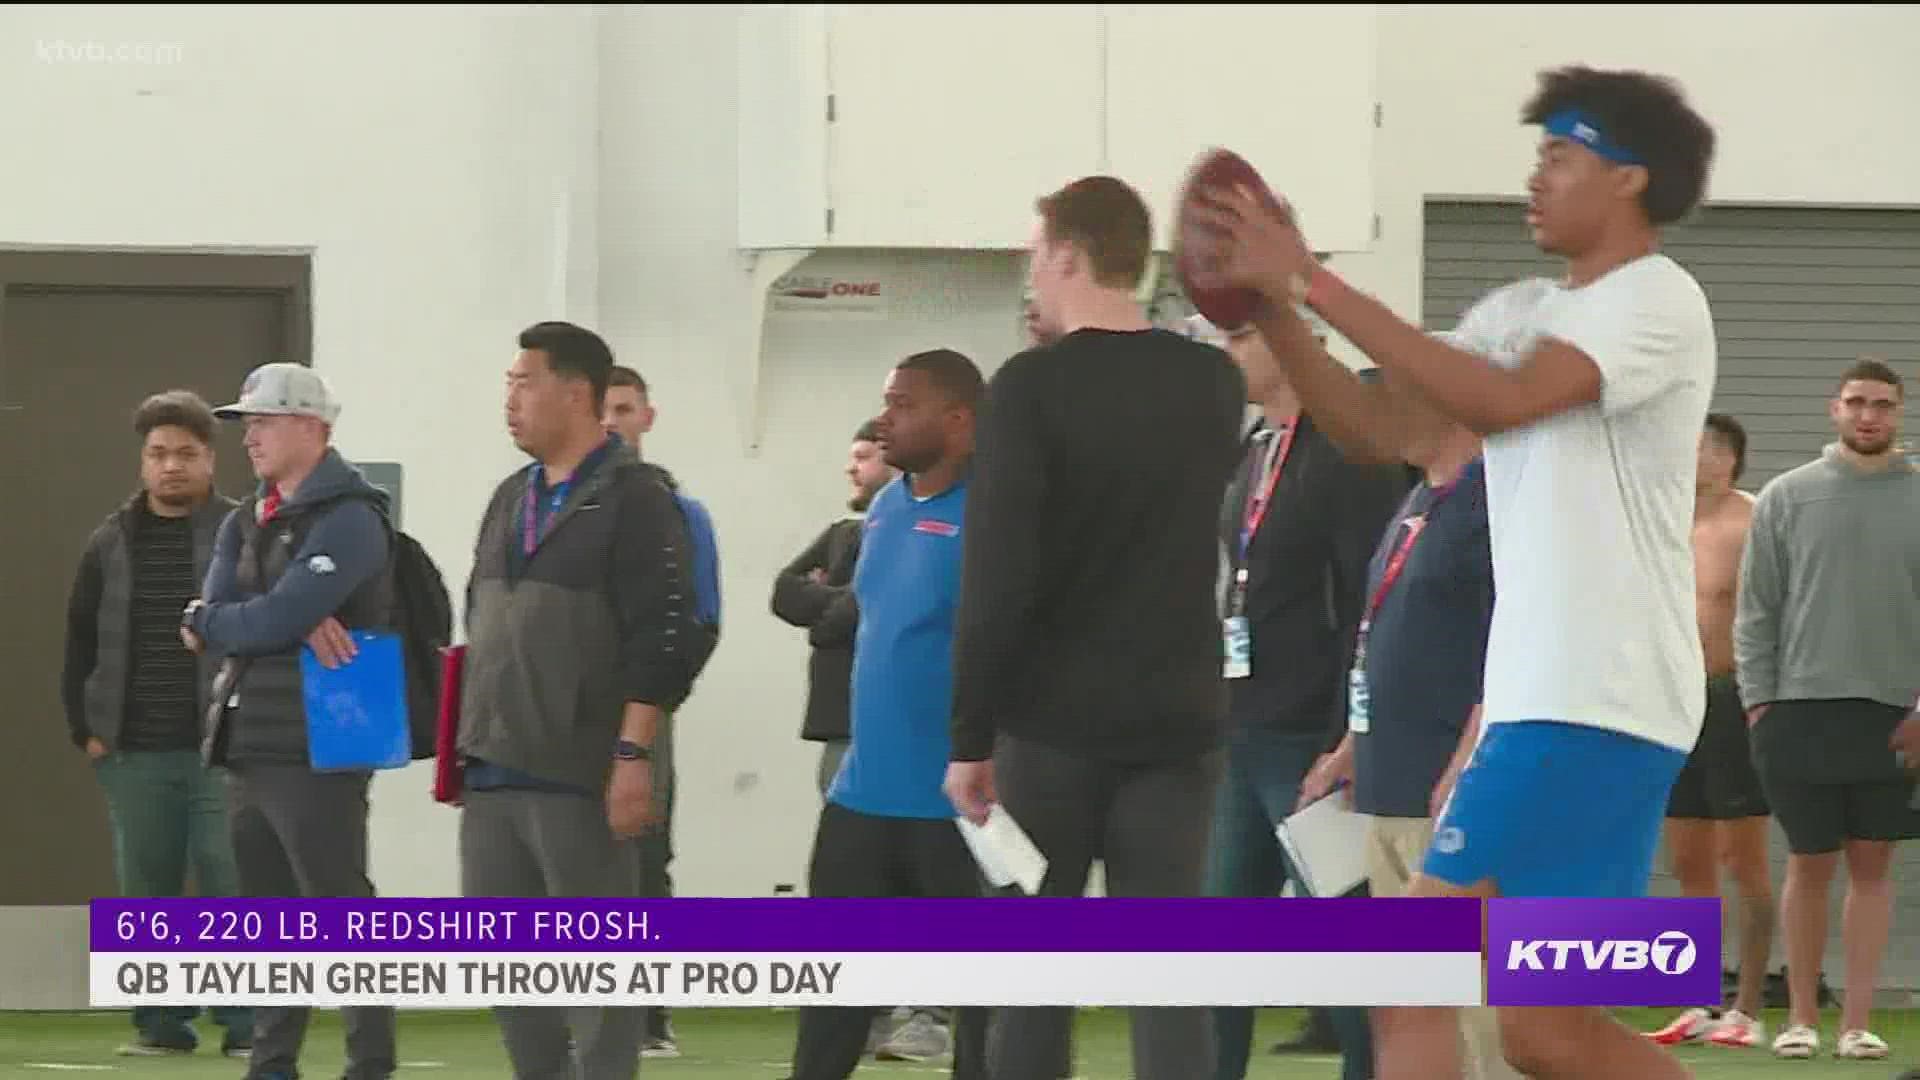 Boise State had to receive a waiver to allow the underclassman to throw at Pro Day. Green impressed outgoing Bronco wide receiver Khalil Shakir.